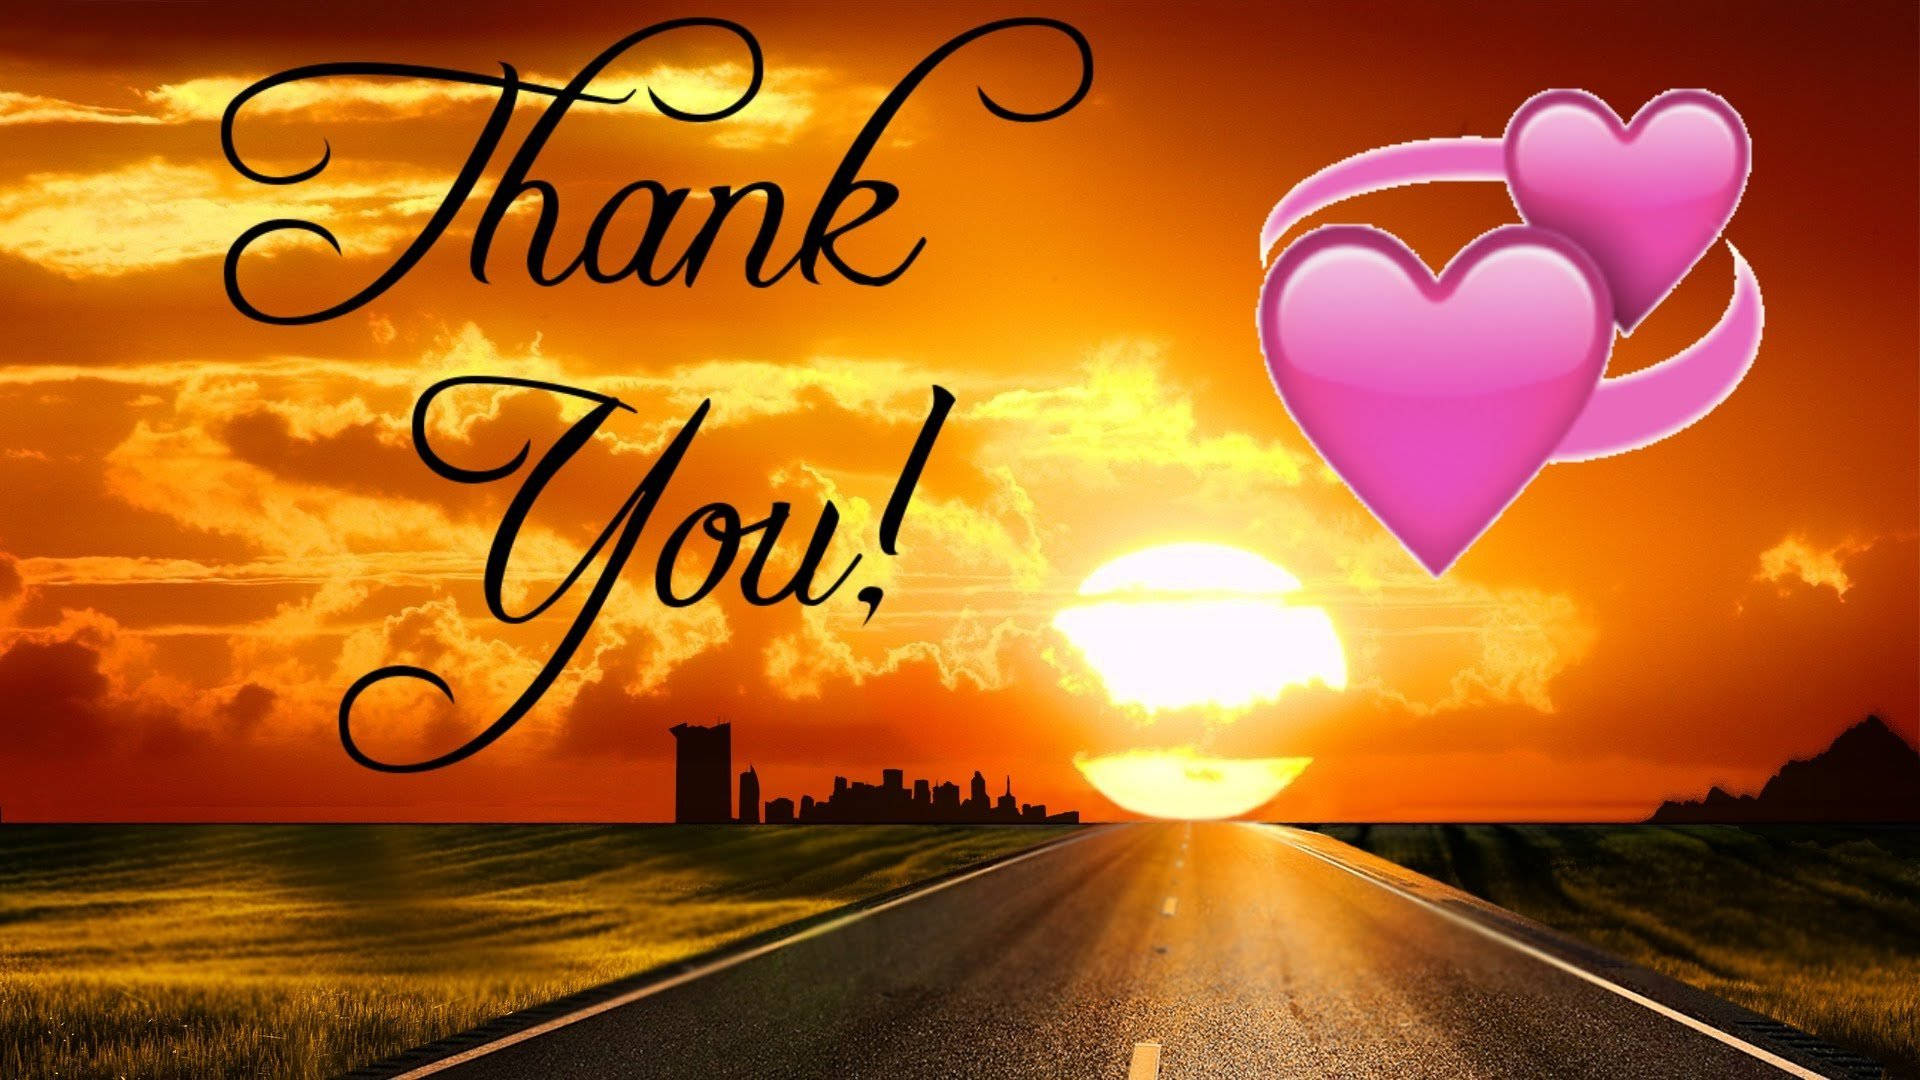 A Heartfelt Thank You Note With Stunning Background Background